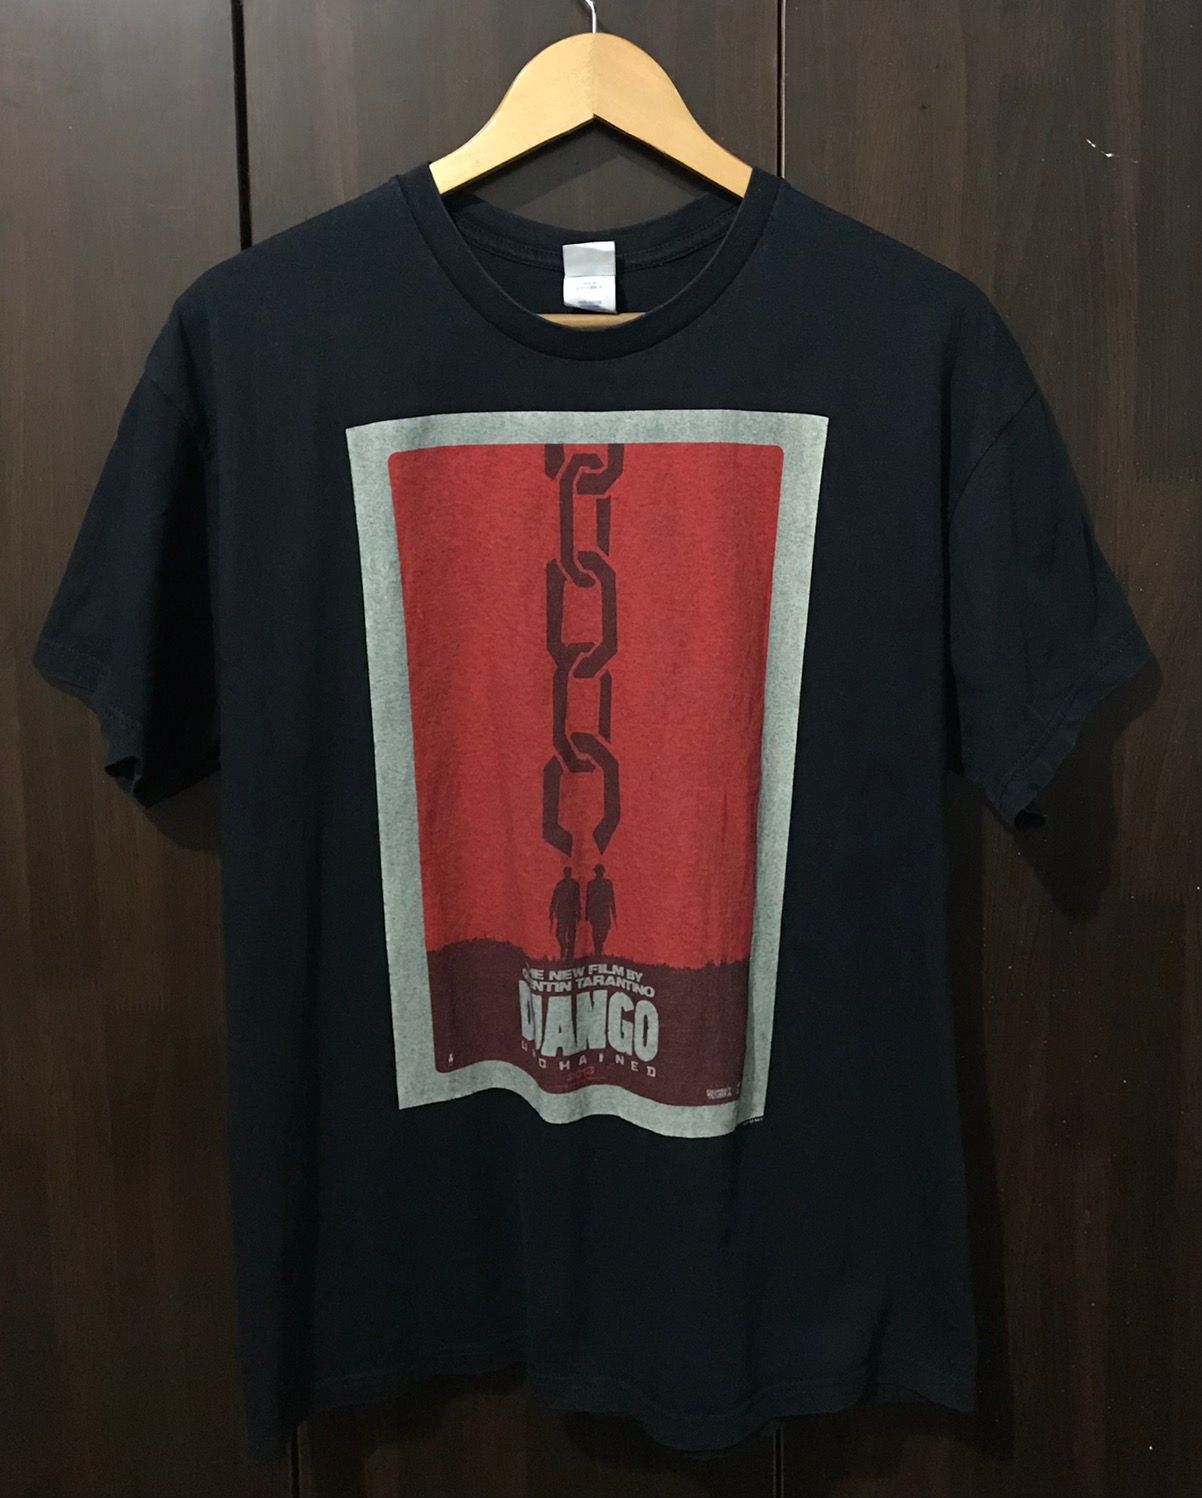 Movie 2013 DJANGO Unchained Promo Movie “not for sale” Tshirt Size US XL / EU 56 / 4 - 1 Preview